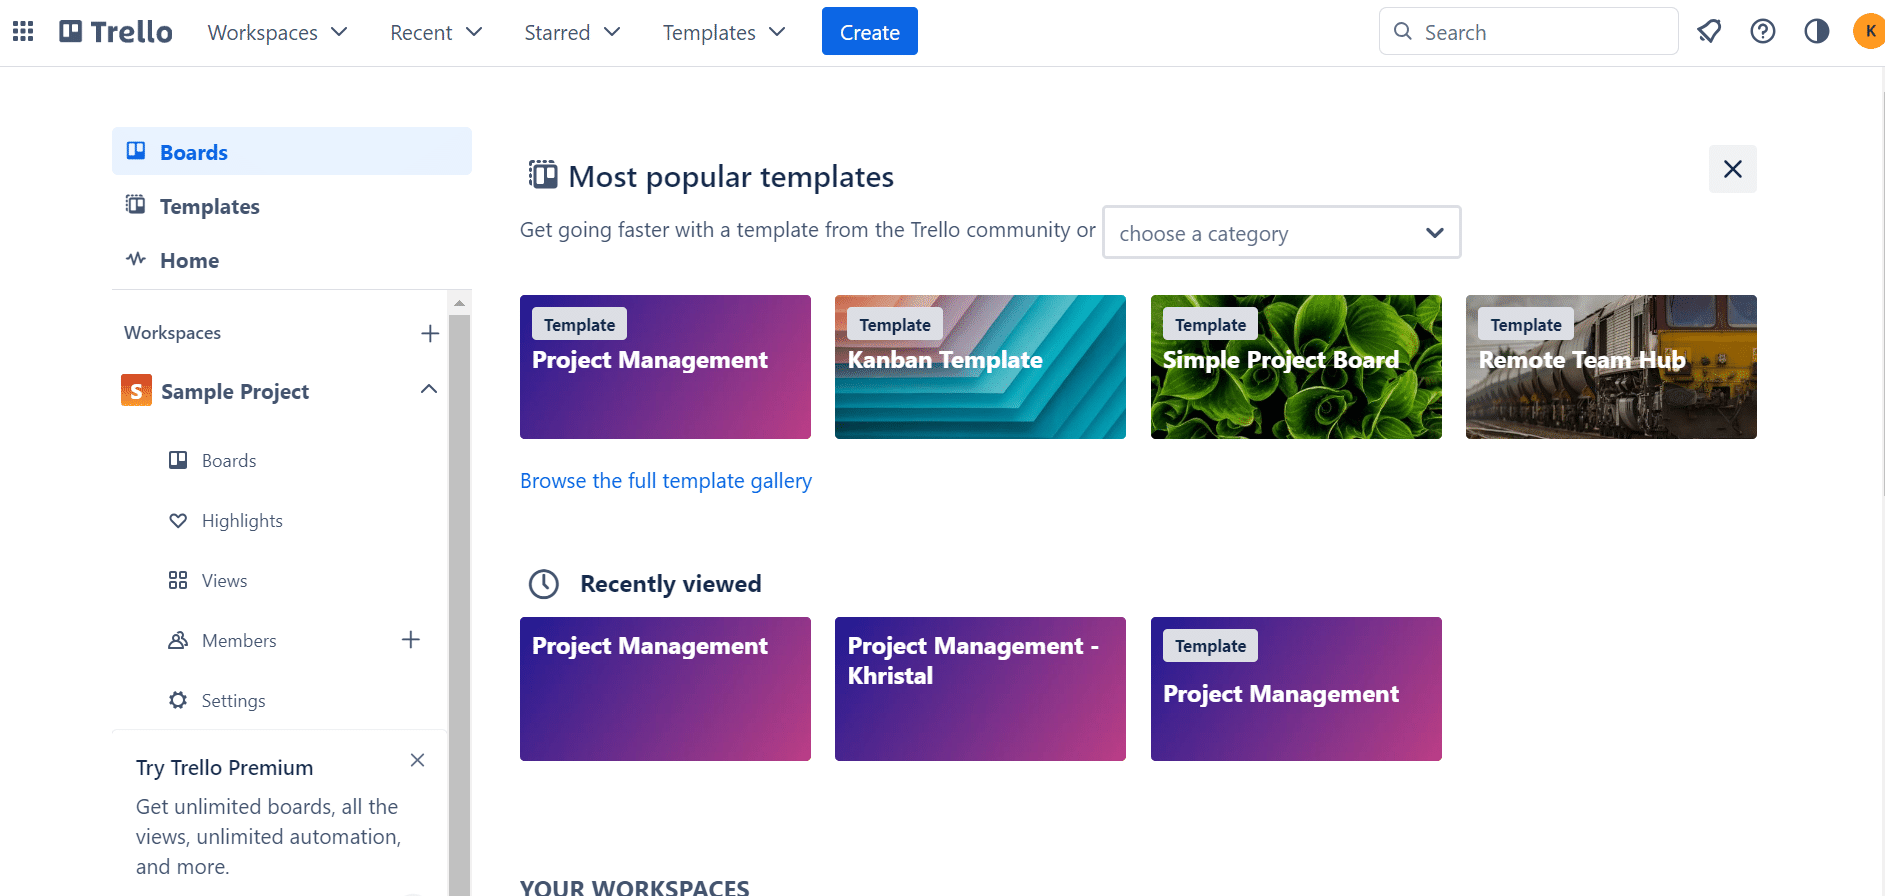 Trello has many templates for users to choose from